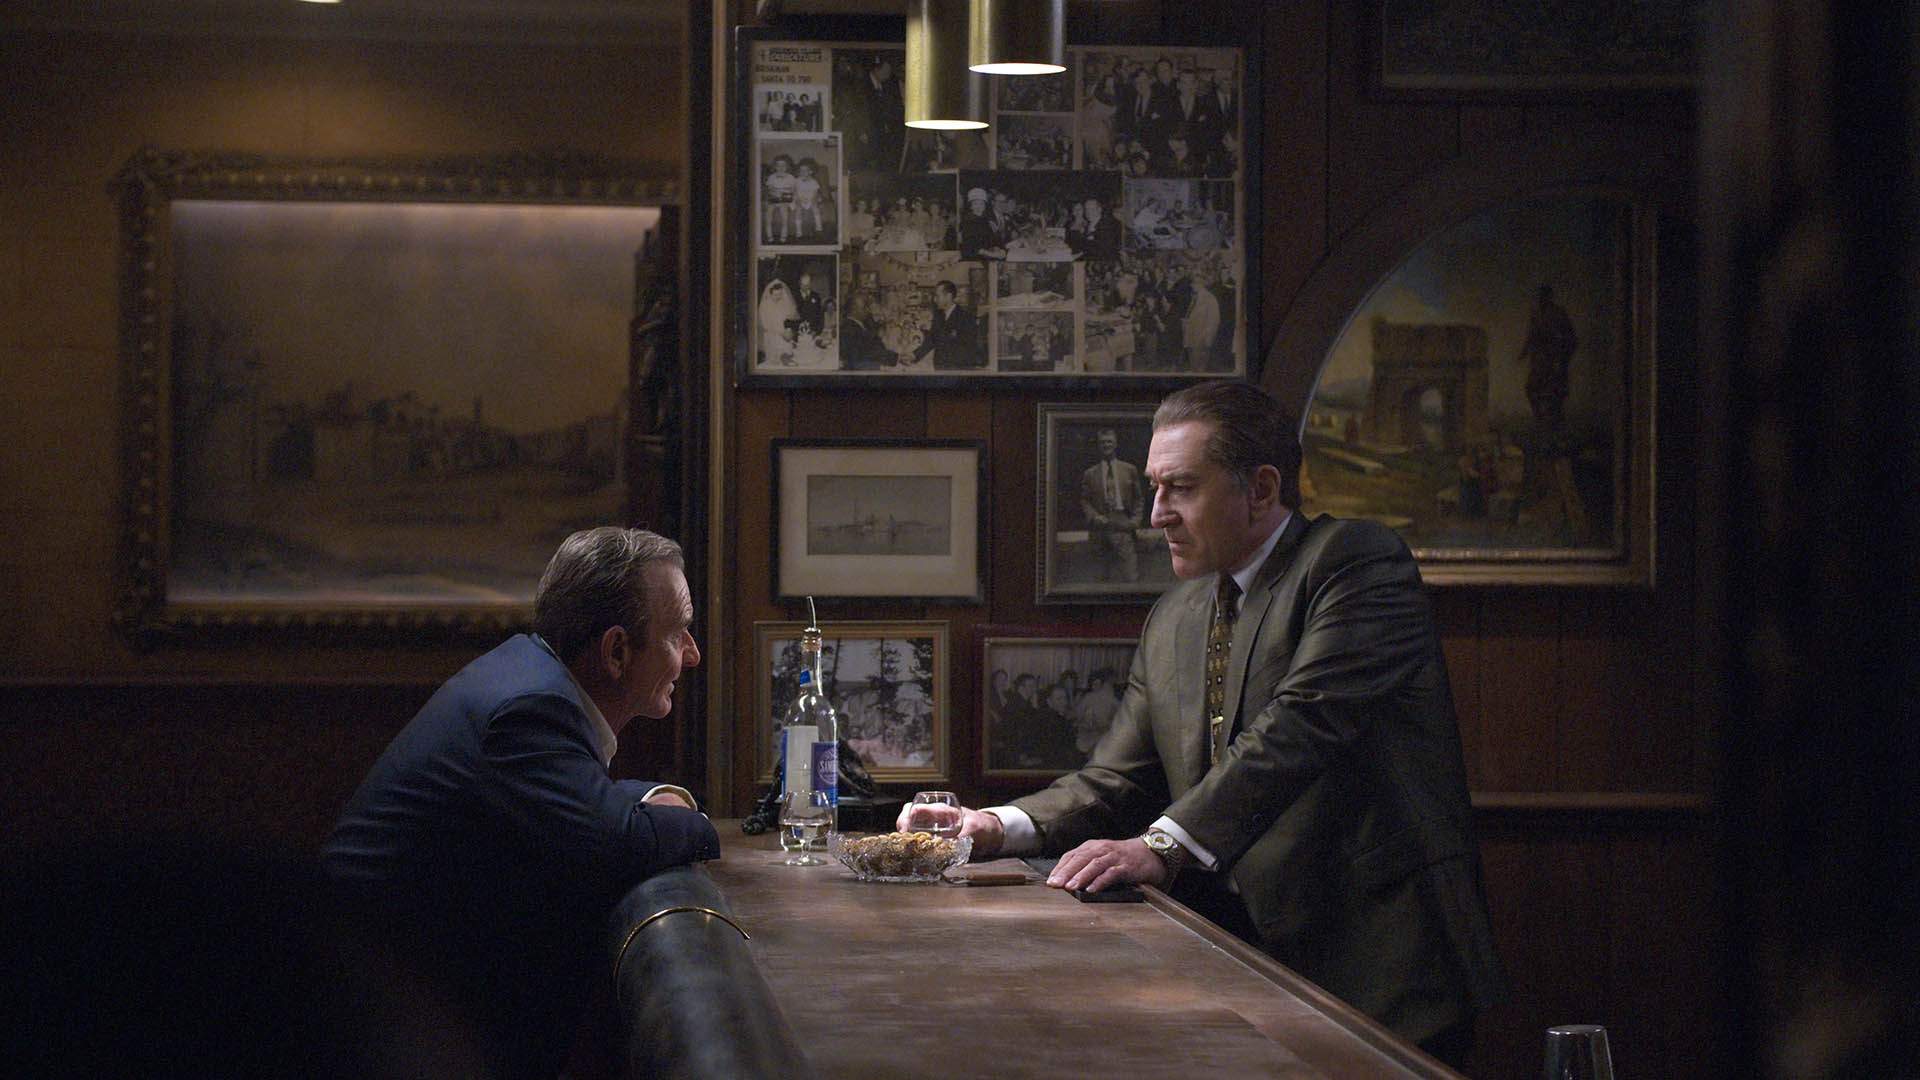 Martin Scorsese Returns to His Gangster Roots in the First Trailer for Netflix's 'The Irishman'